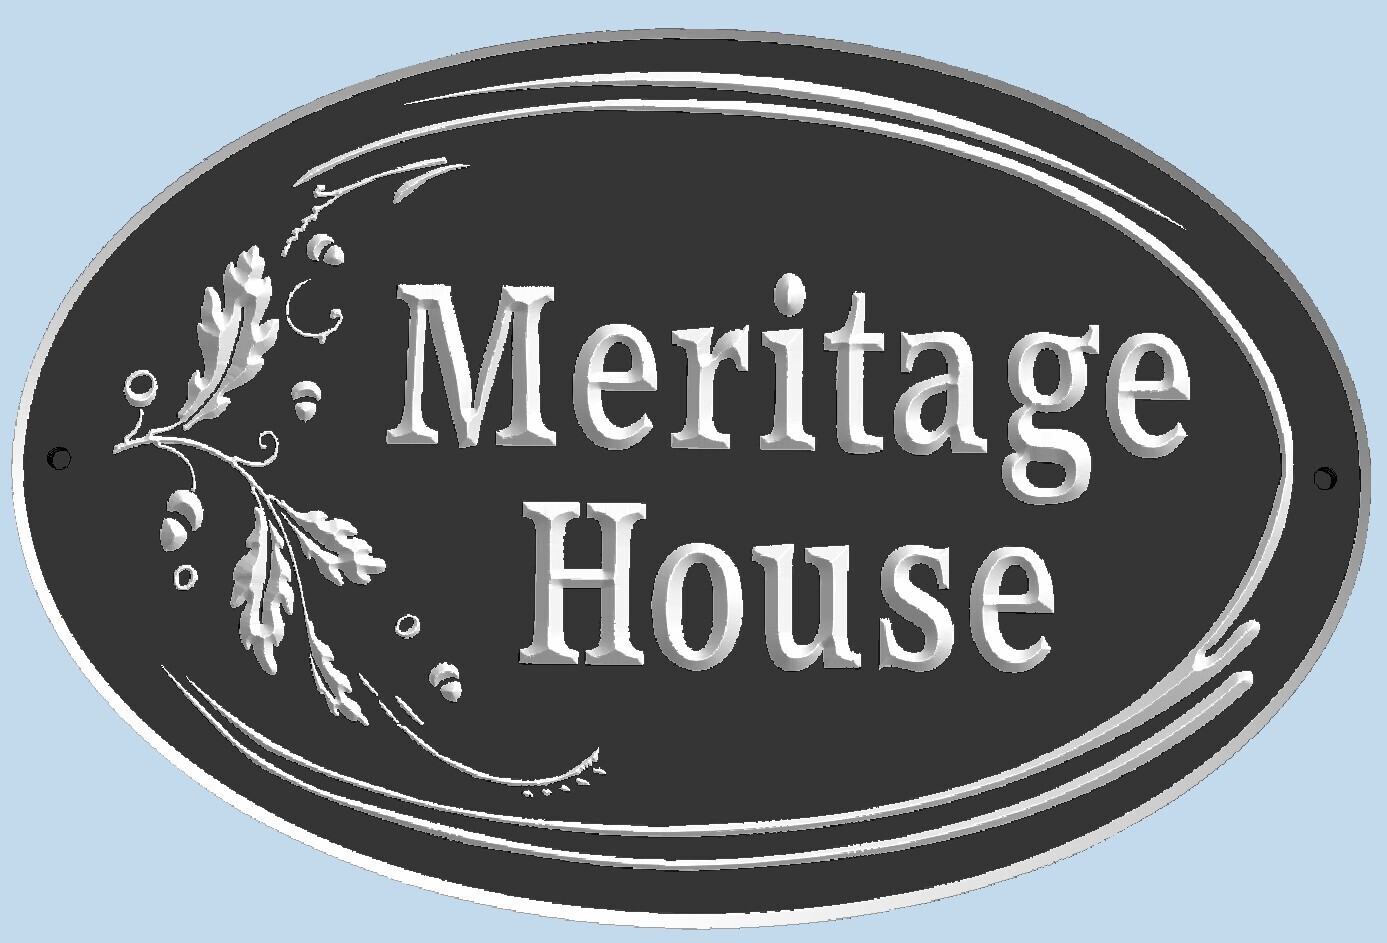 Weather Resistant Custom Exterior Oval Sign Cottage Sign House Sign With Carved Oak Leaves and Acorns Painted with White Carving - Solid 3/4 inch thick PVC